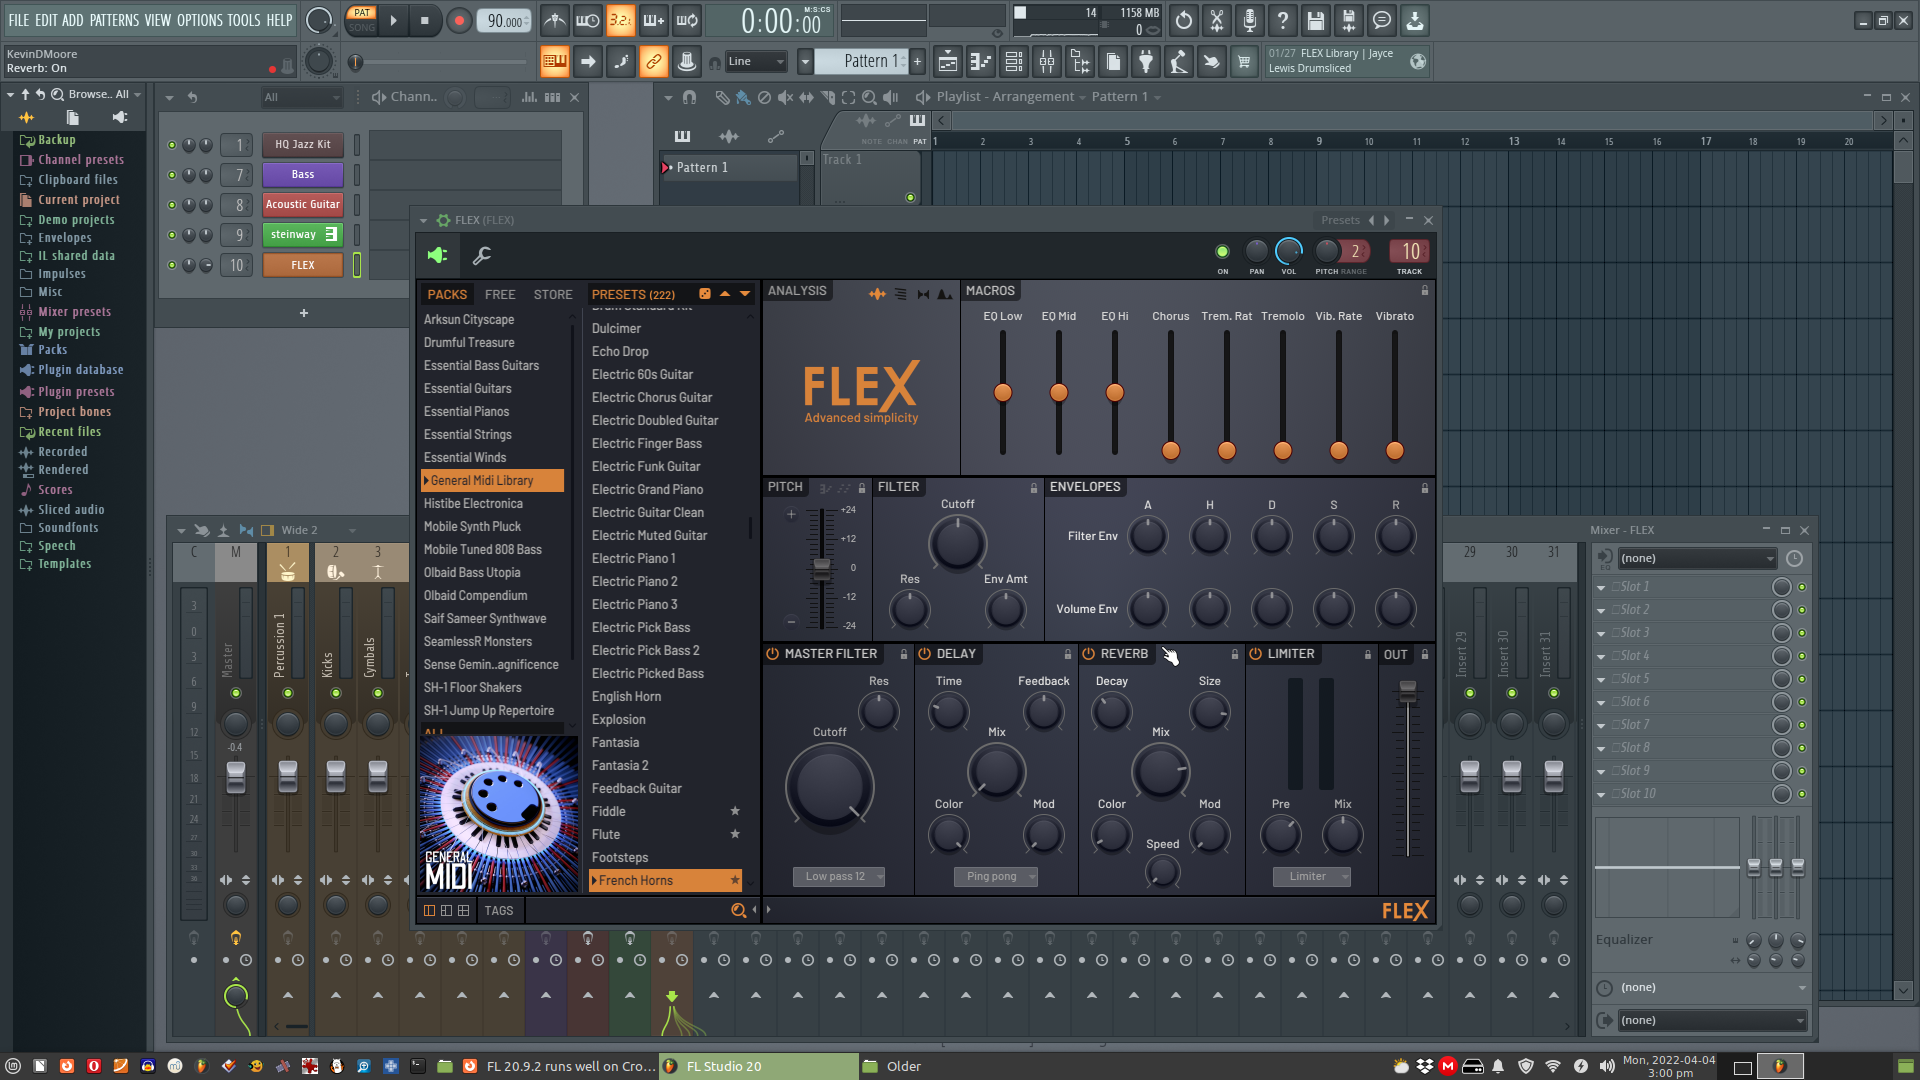 FL Studio 20 out now with native Mac and Windows compatibility